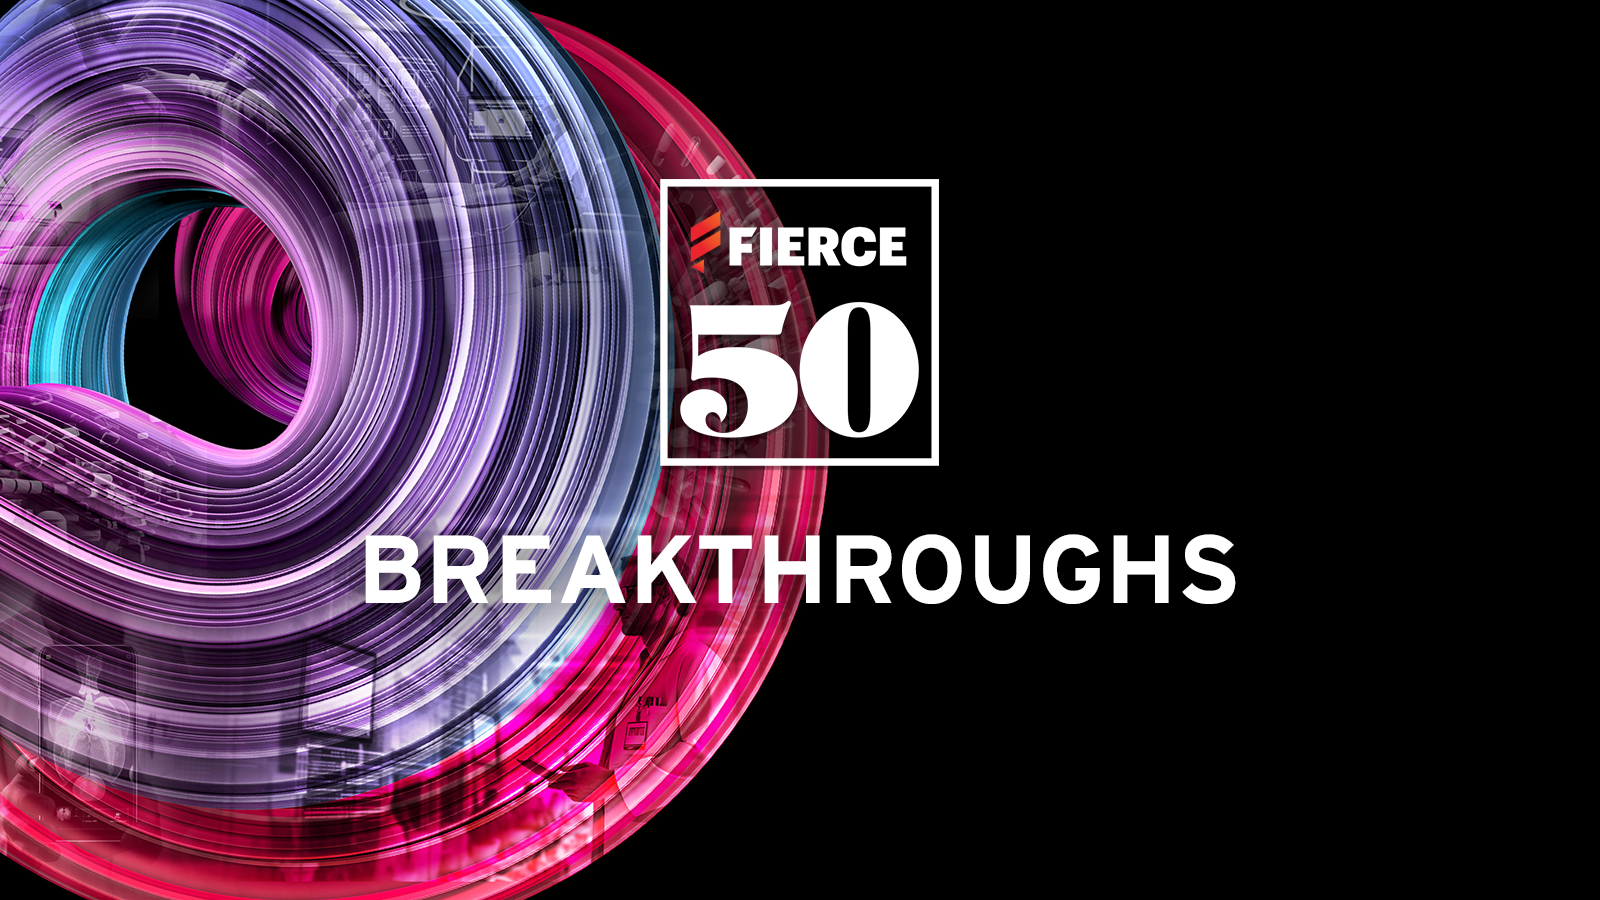 Fierce 50 Breakthroughs Category Honorees